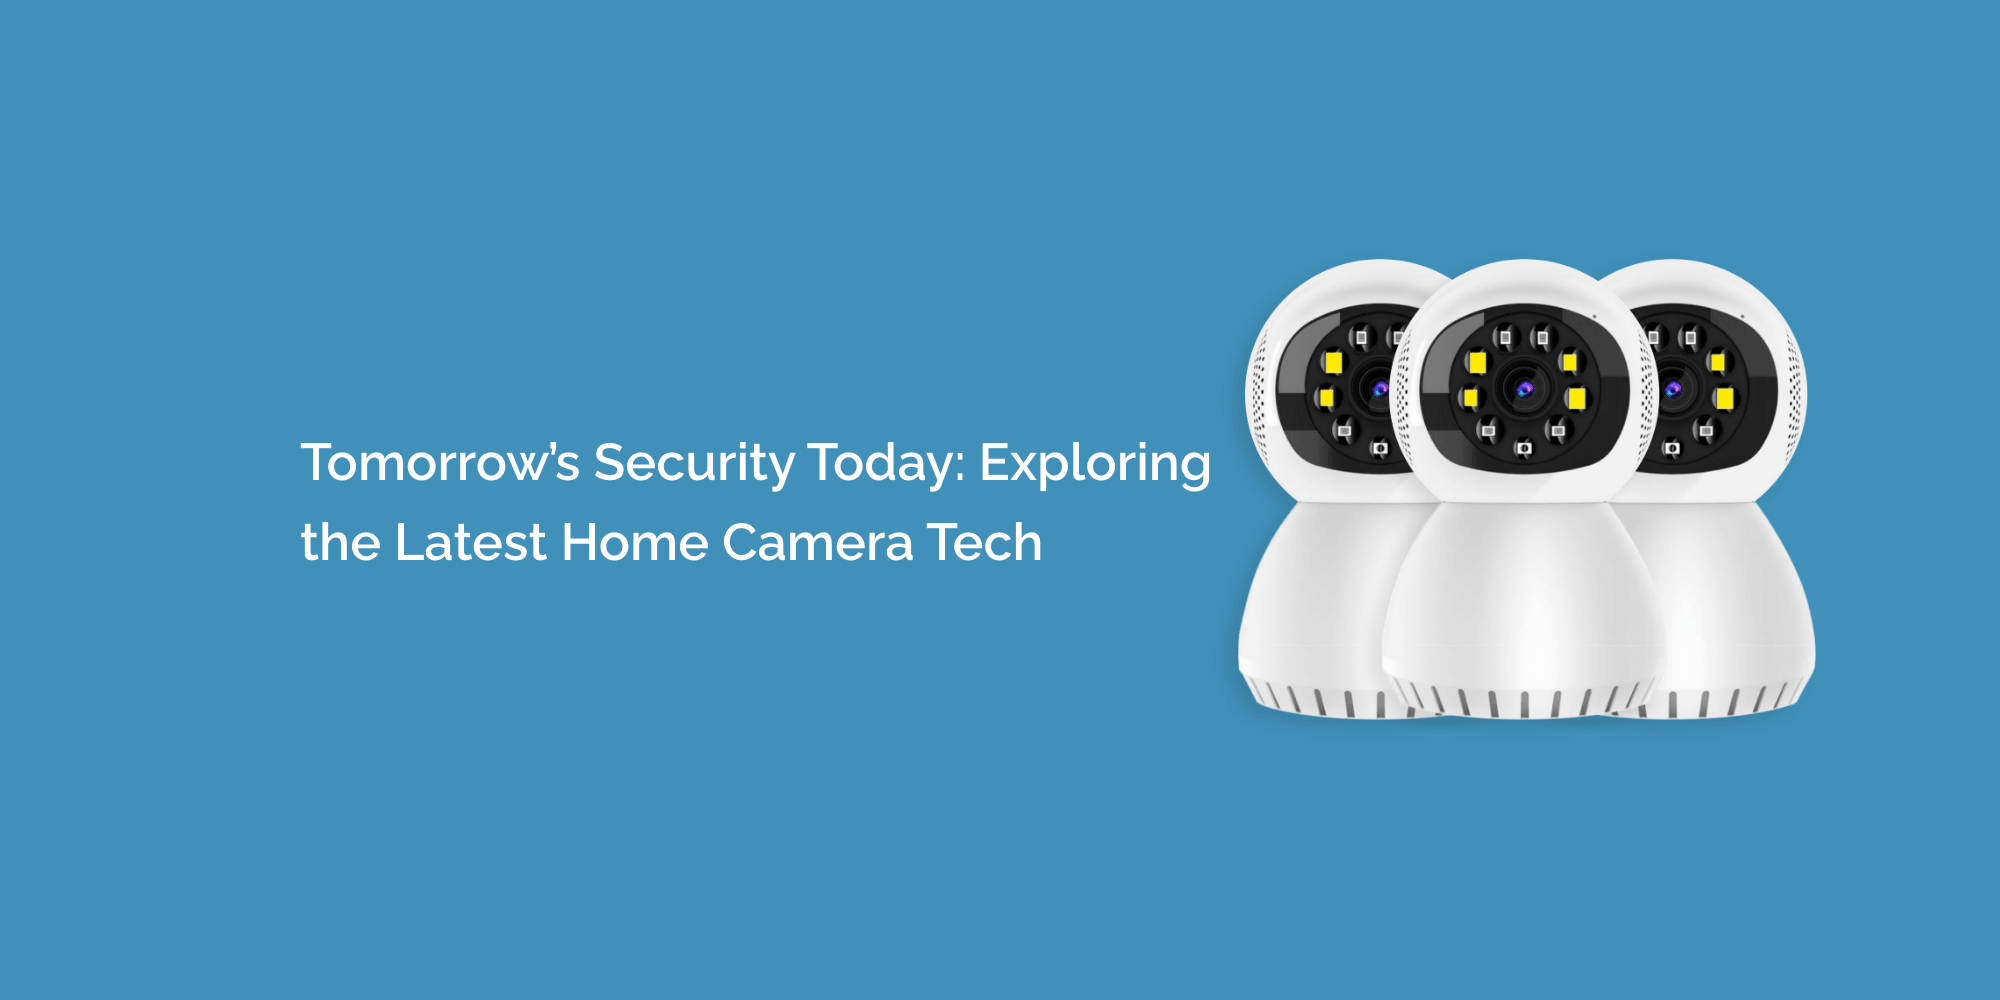 Tomorrow's Security Today: Exploring the Latest Home Camera Tech